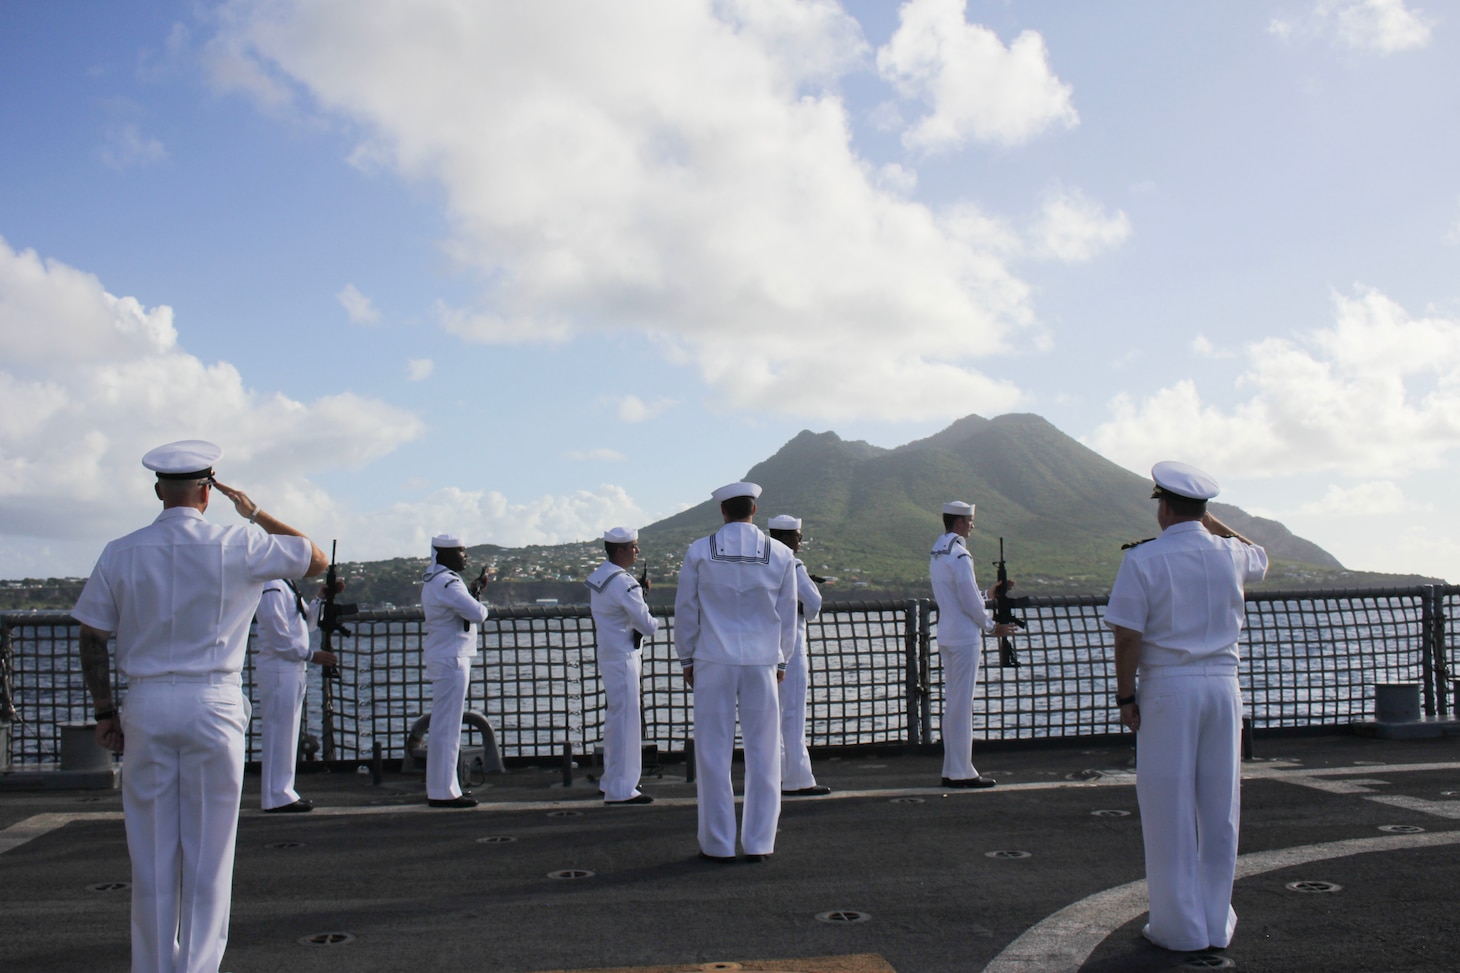 Sailors assigned to the Freedom-variant littoral combat ship USS Milwaukee (LCS 5) conduct a gun-salute for Statia Day off the coast of Sint Eustatius, Netherlands, Nov. 16, 2022. Statia Day is a national holiday celebrated on the Caribbean island of Sint Eustatius. It celebrates the “first salute” when Sint Eustatius, locally known as Statia, became the first country to recognize the United States as a nation 245 years ago when after the U.S. declared independence, a Continental Navy ship fired a gun salute upon entering the harbor, and the island, by order of the Dutch governor, returned the salute. Milwaukee is deployed to the U.S. 4th Fleet area of operations to support Joint Interagency Task Force South’s mission, which includes counter-illicit drug trafficking missions in the Caribbean and Eastern Pacific.